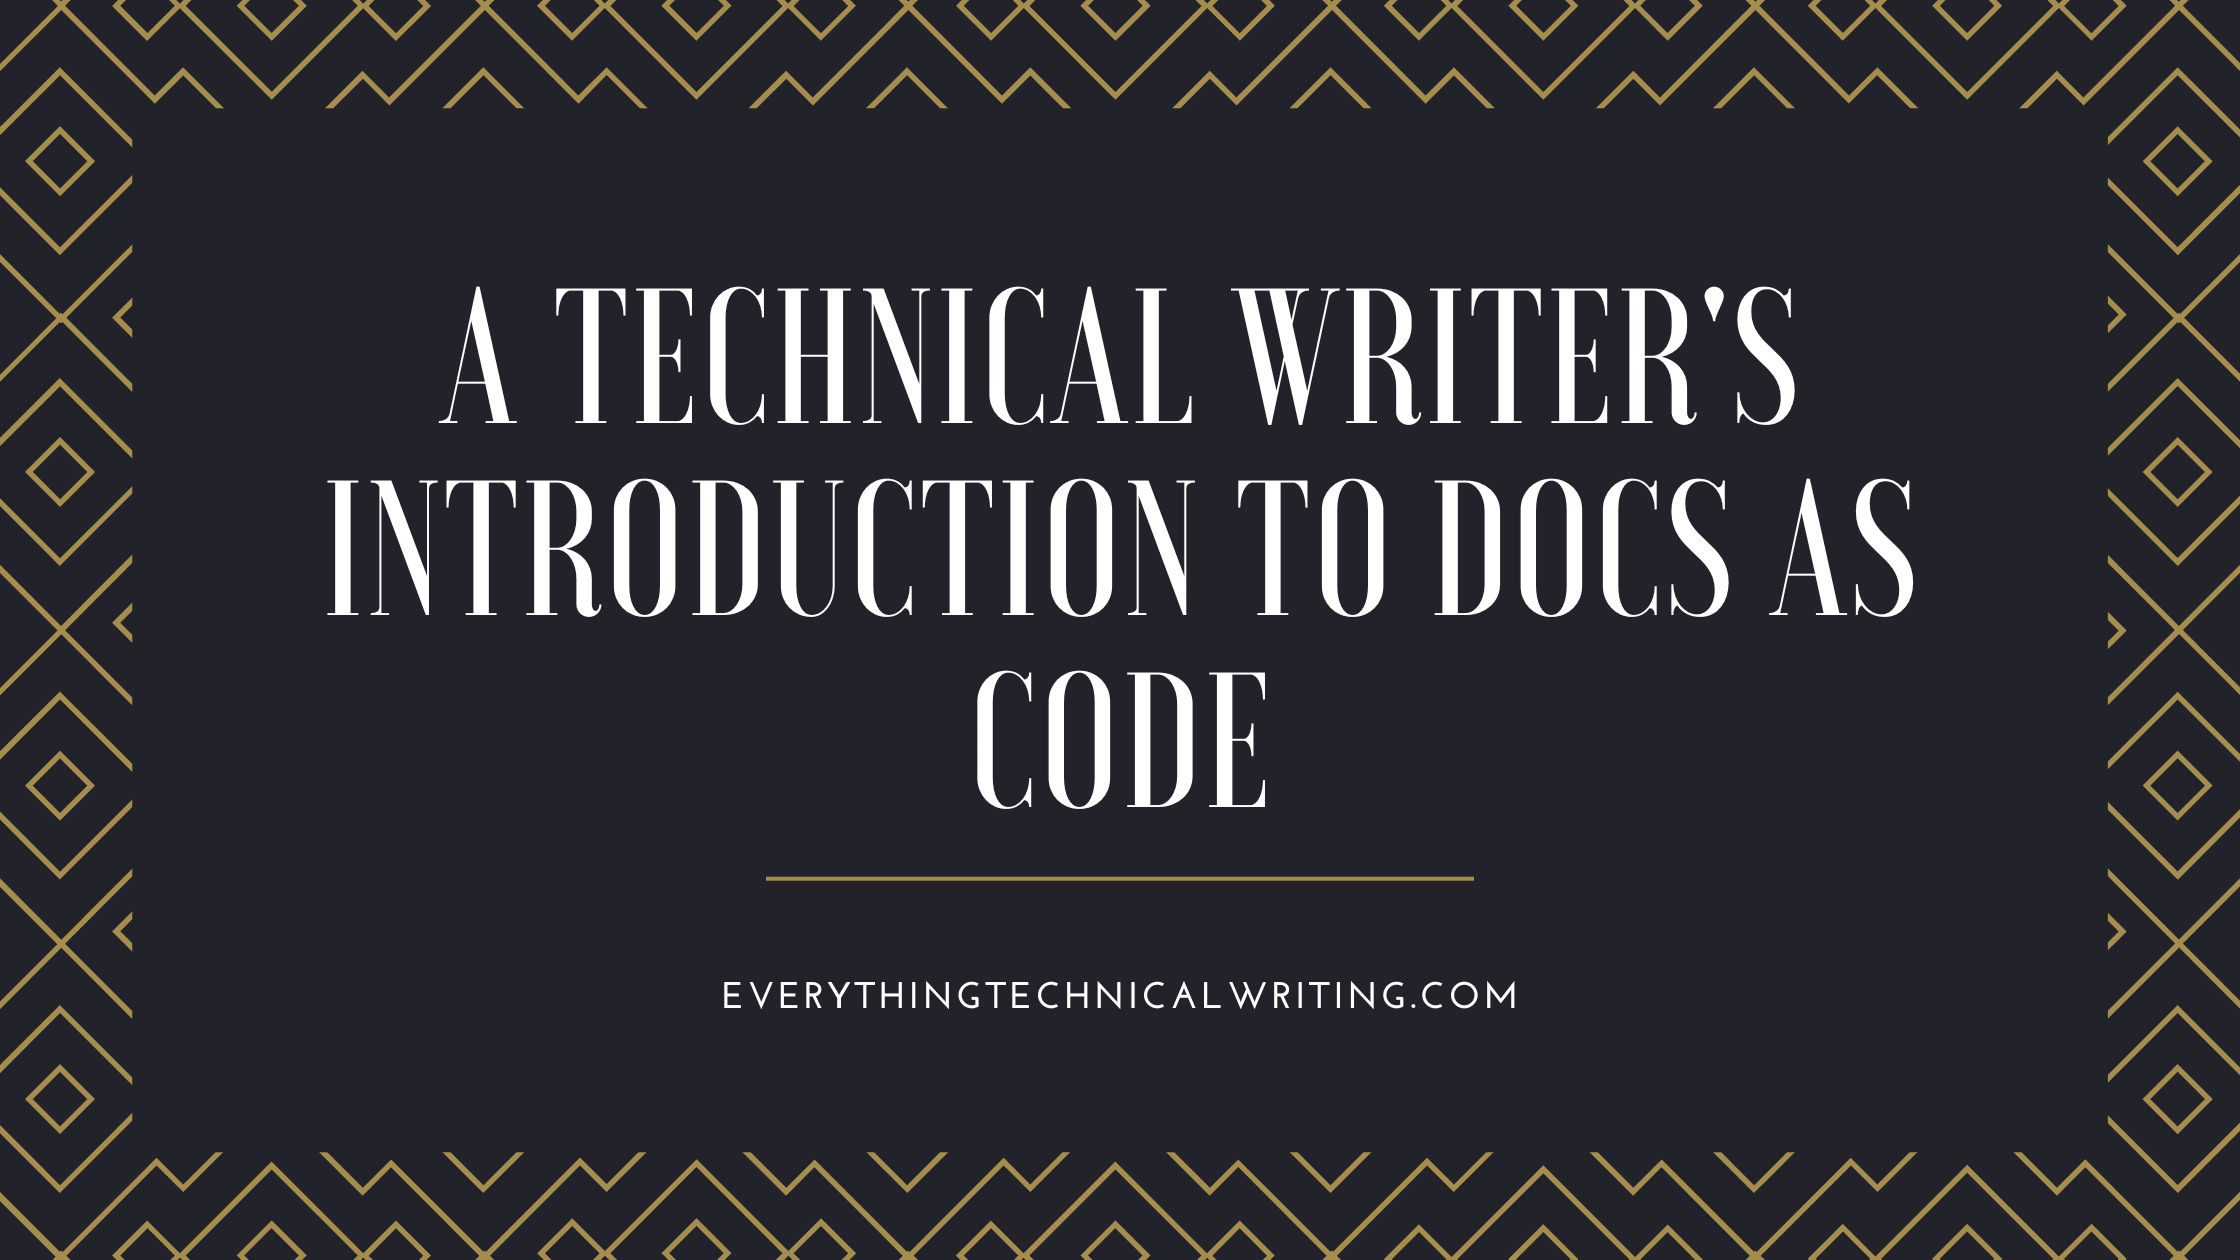 A Technical Writer's Introduction to Docs as Code